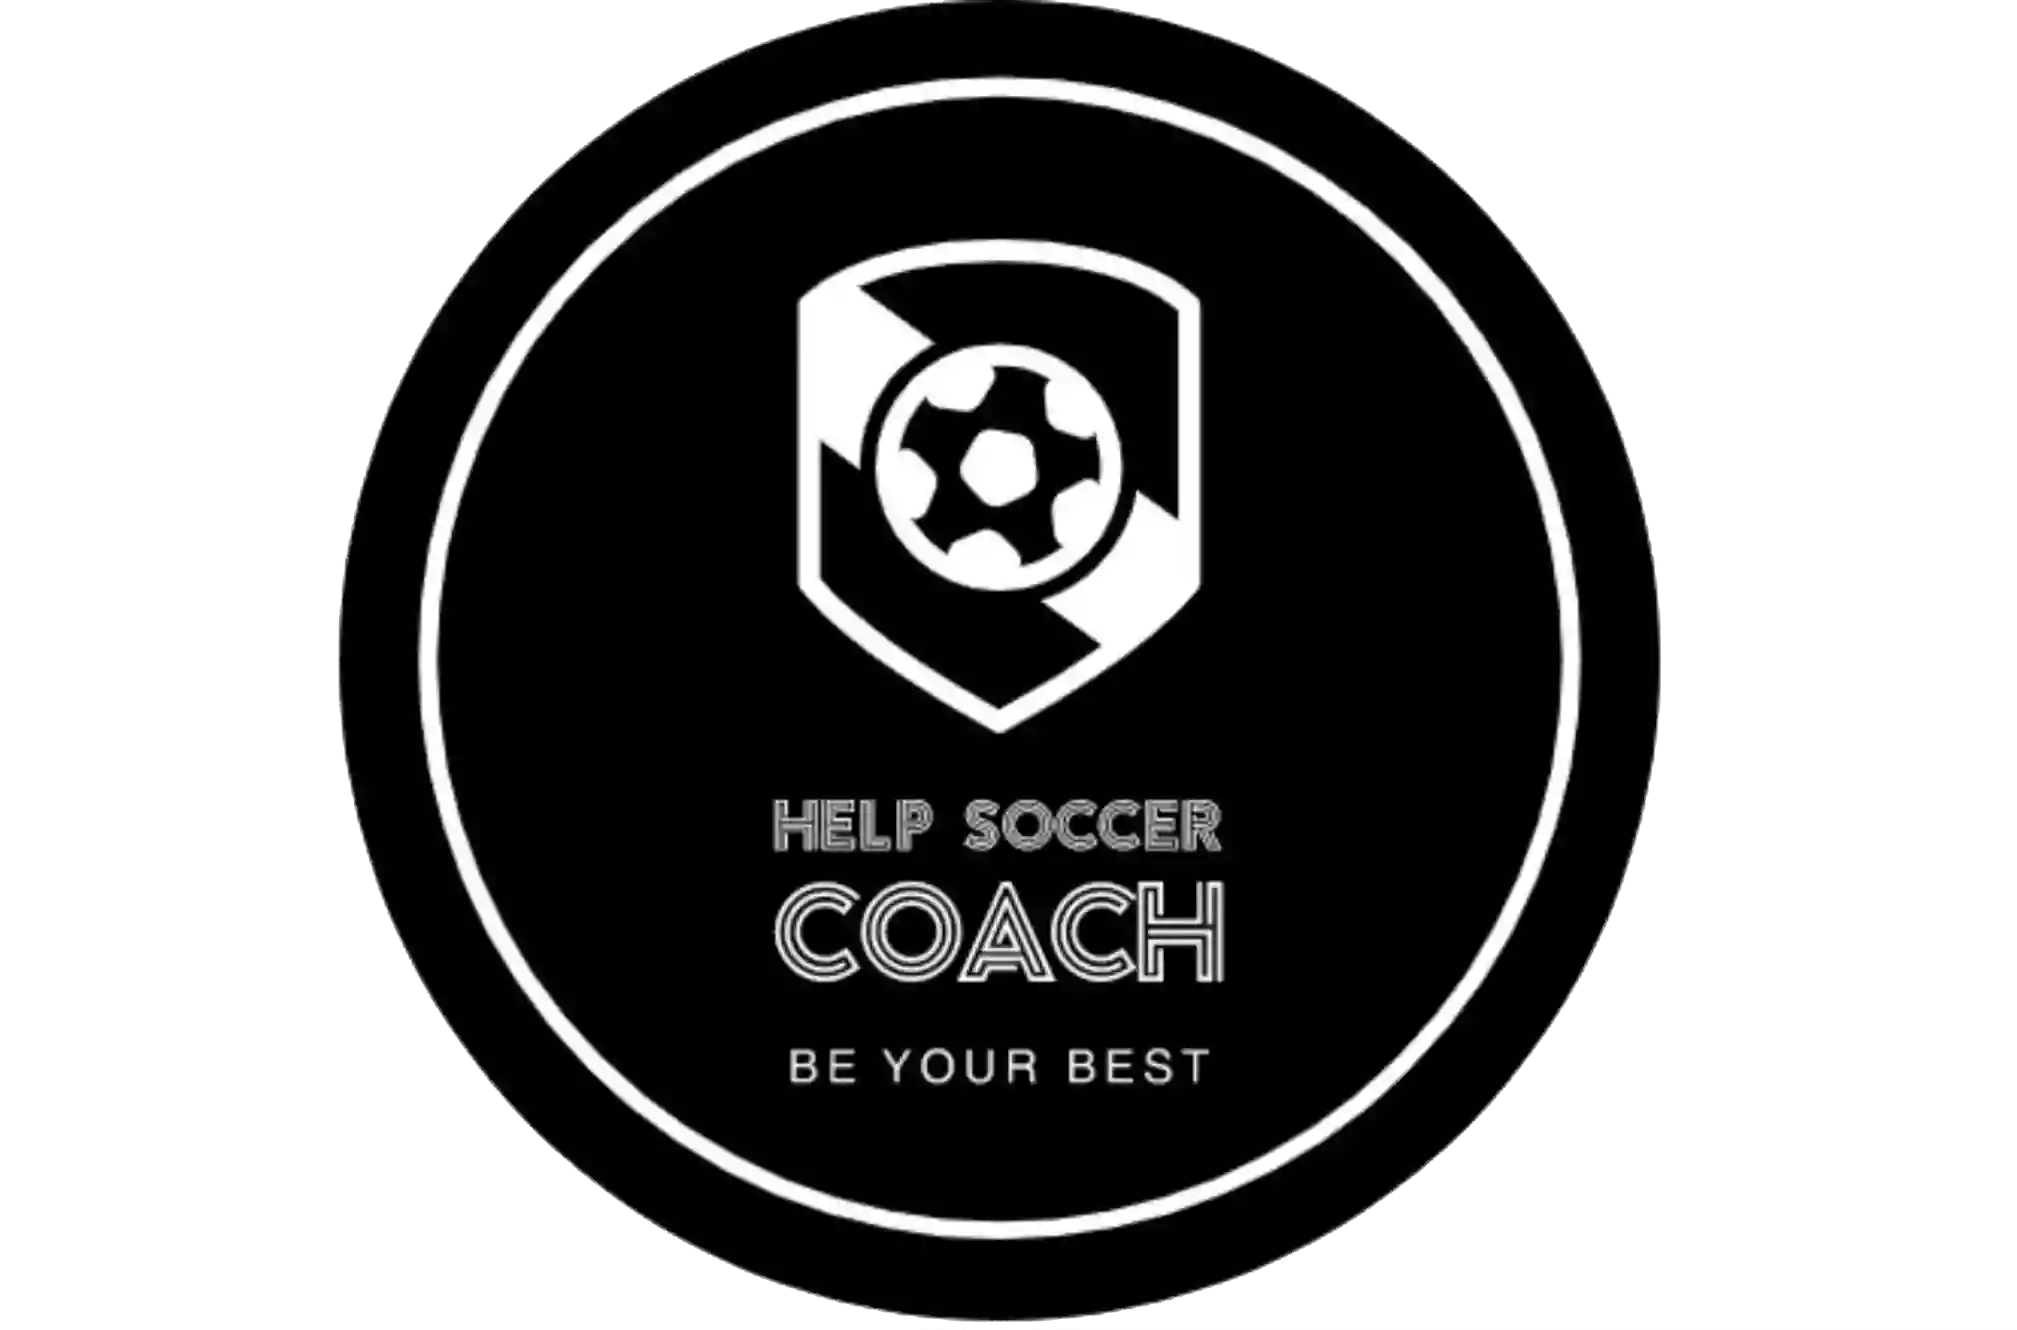 HelpSoccerCoach Limited